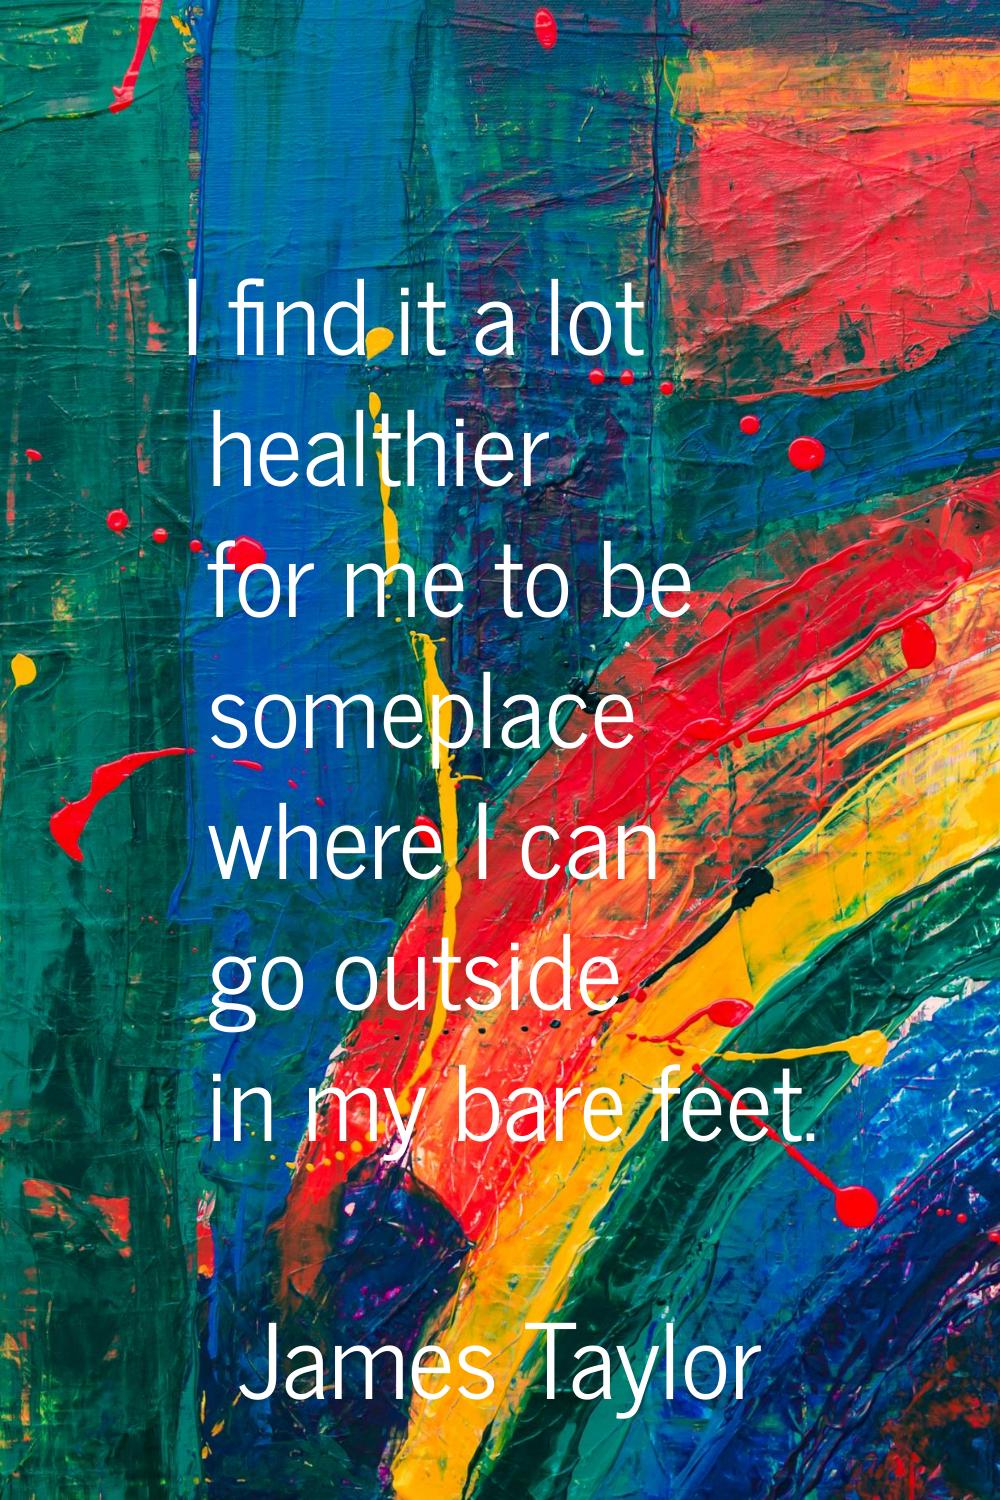 I find it a lot healthier for me to be someplace where I can go outside in my bare feet.